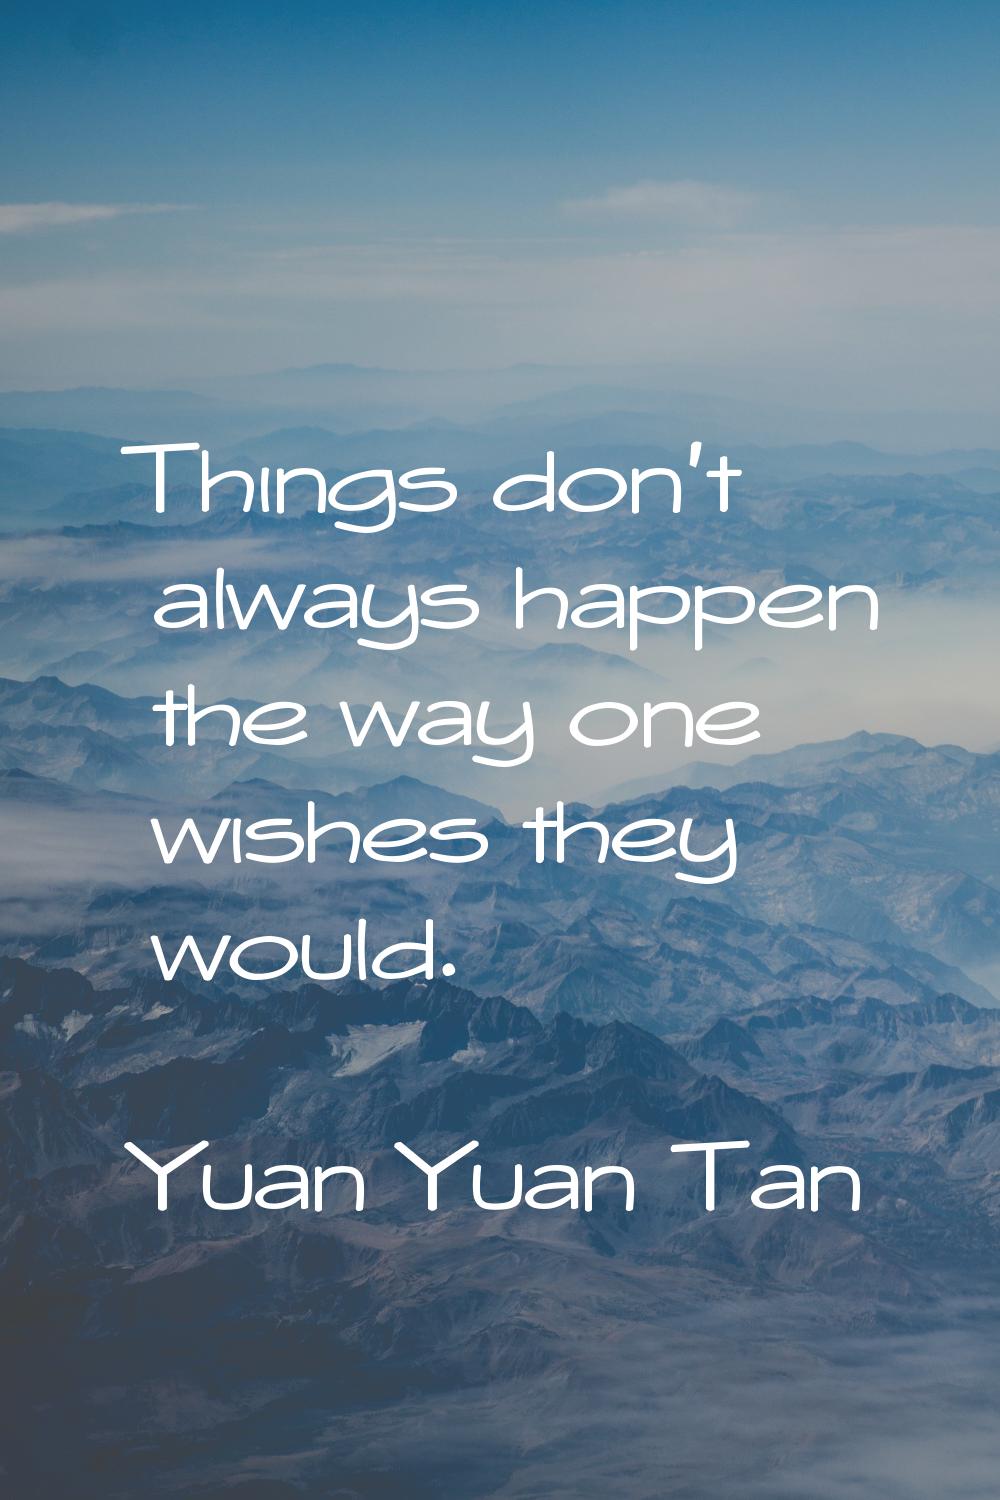 Things don't always happen the way one wishes they would.